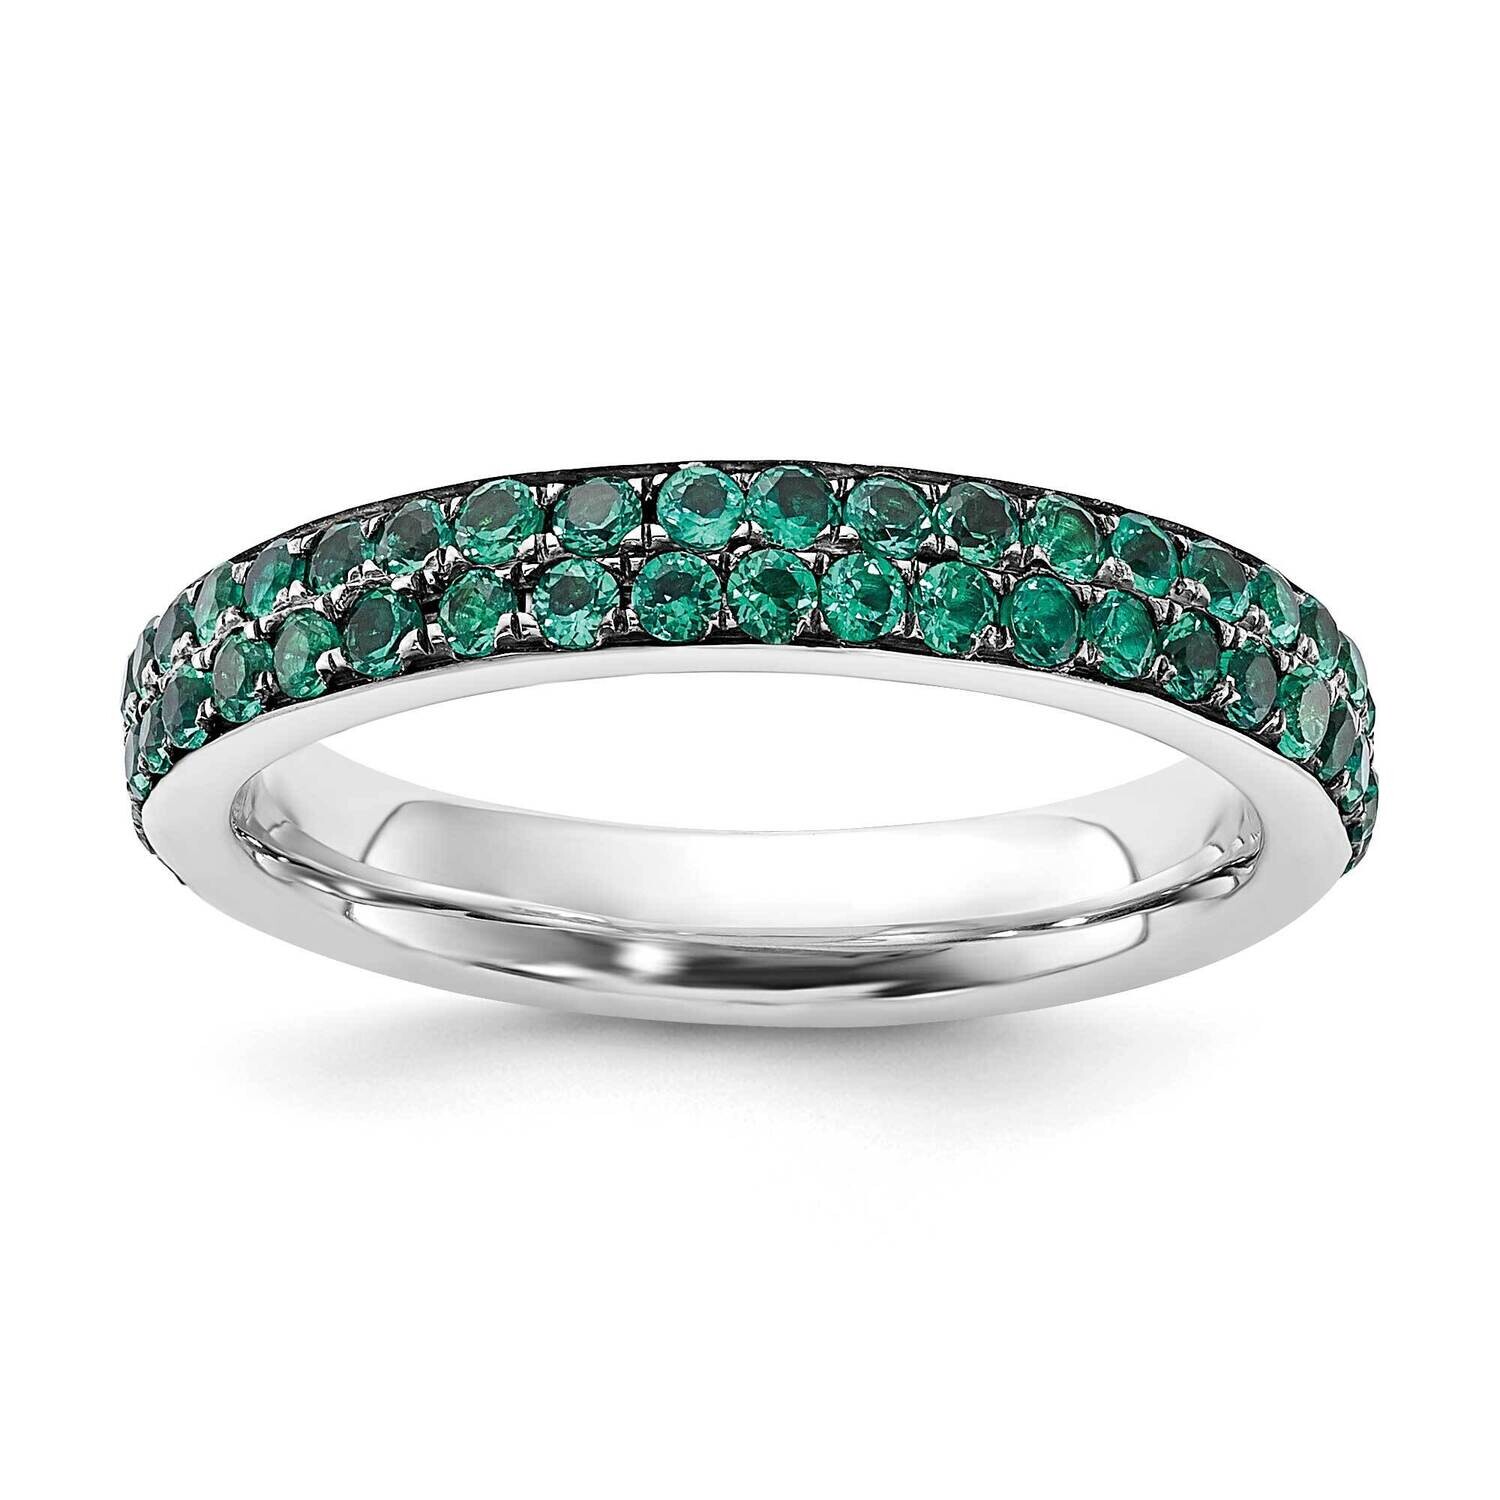 Stackable Expressions Polished Created Emerald Ring Sterling Silver QSK665